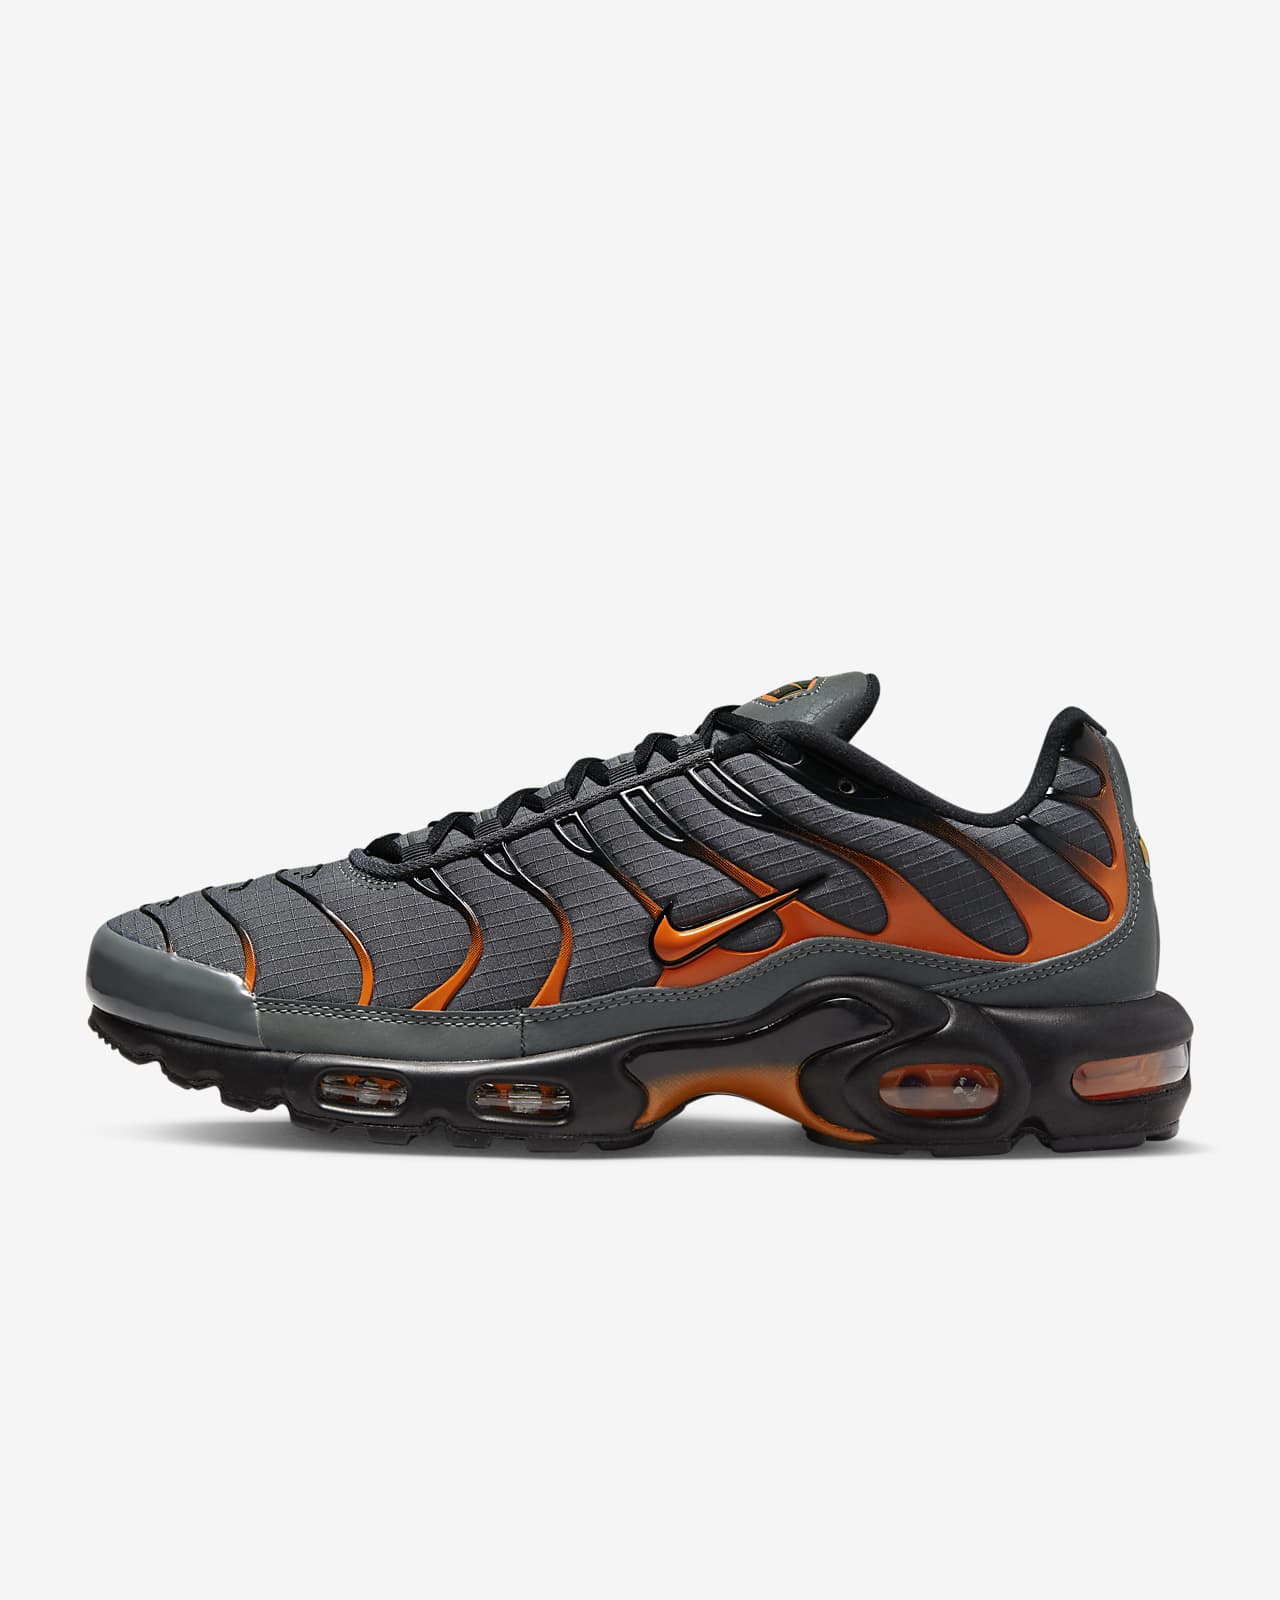 prevent in terms of Retouch Nike Air Max Plus Men's Shoes. Nike SA